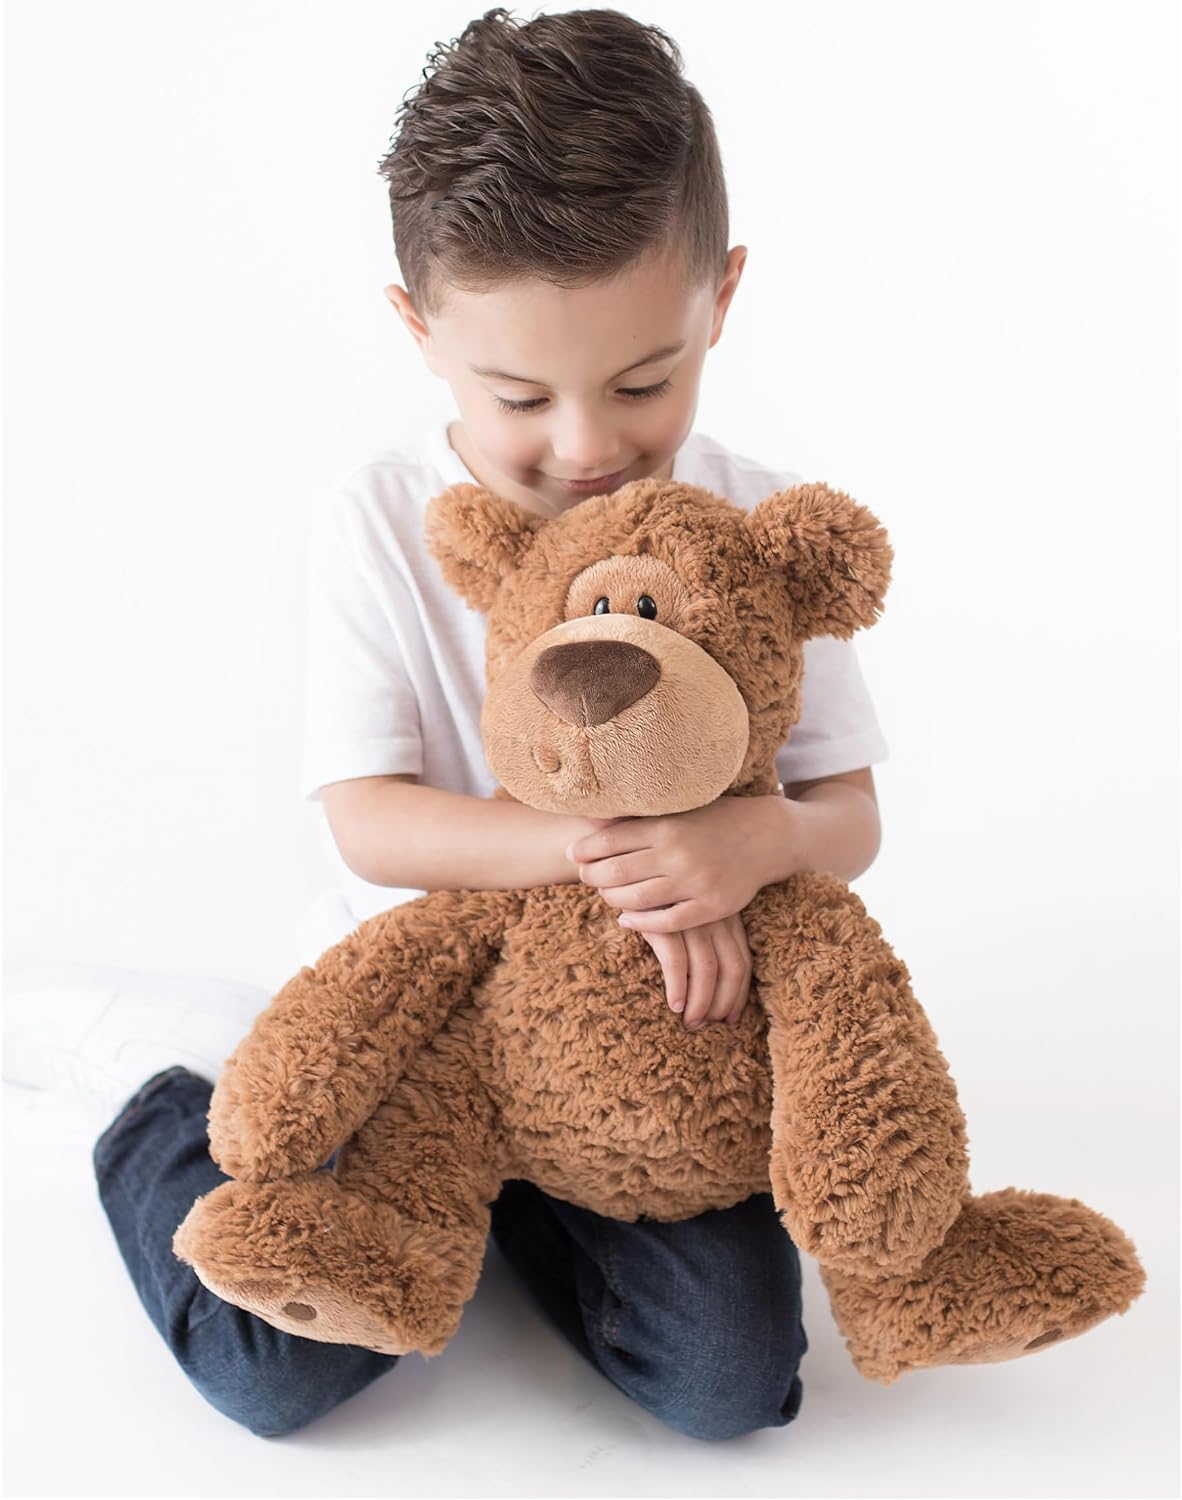 Grahm Polyester Kids Soft Toy Teddy Bear, Small, Brown